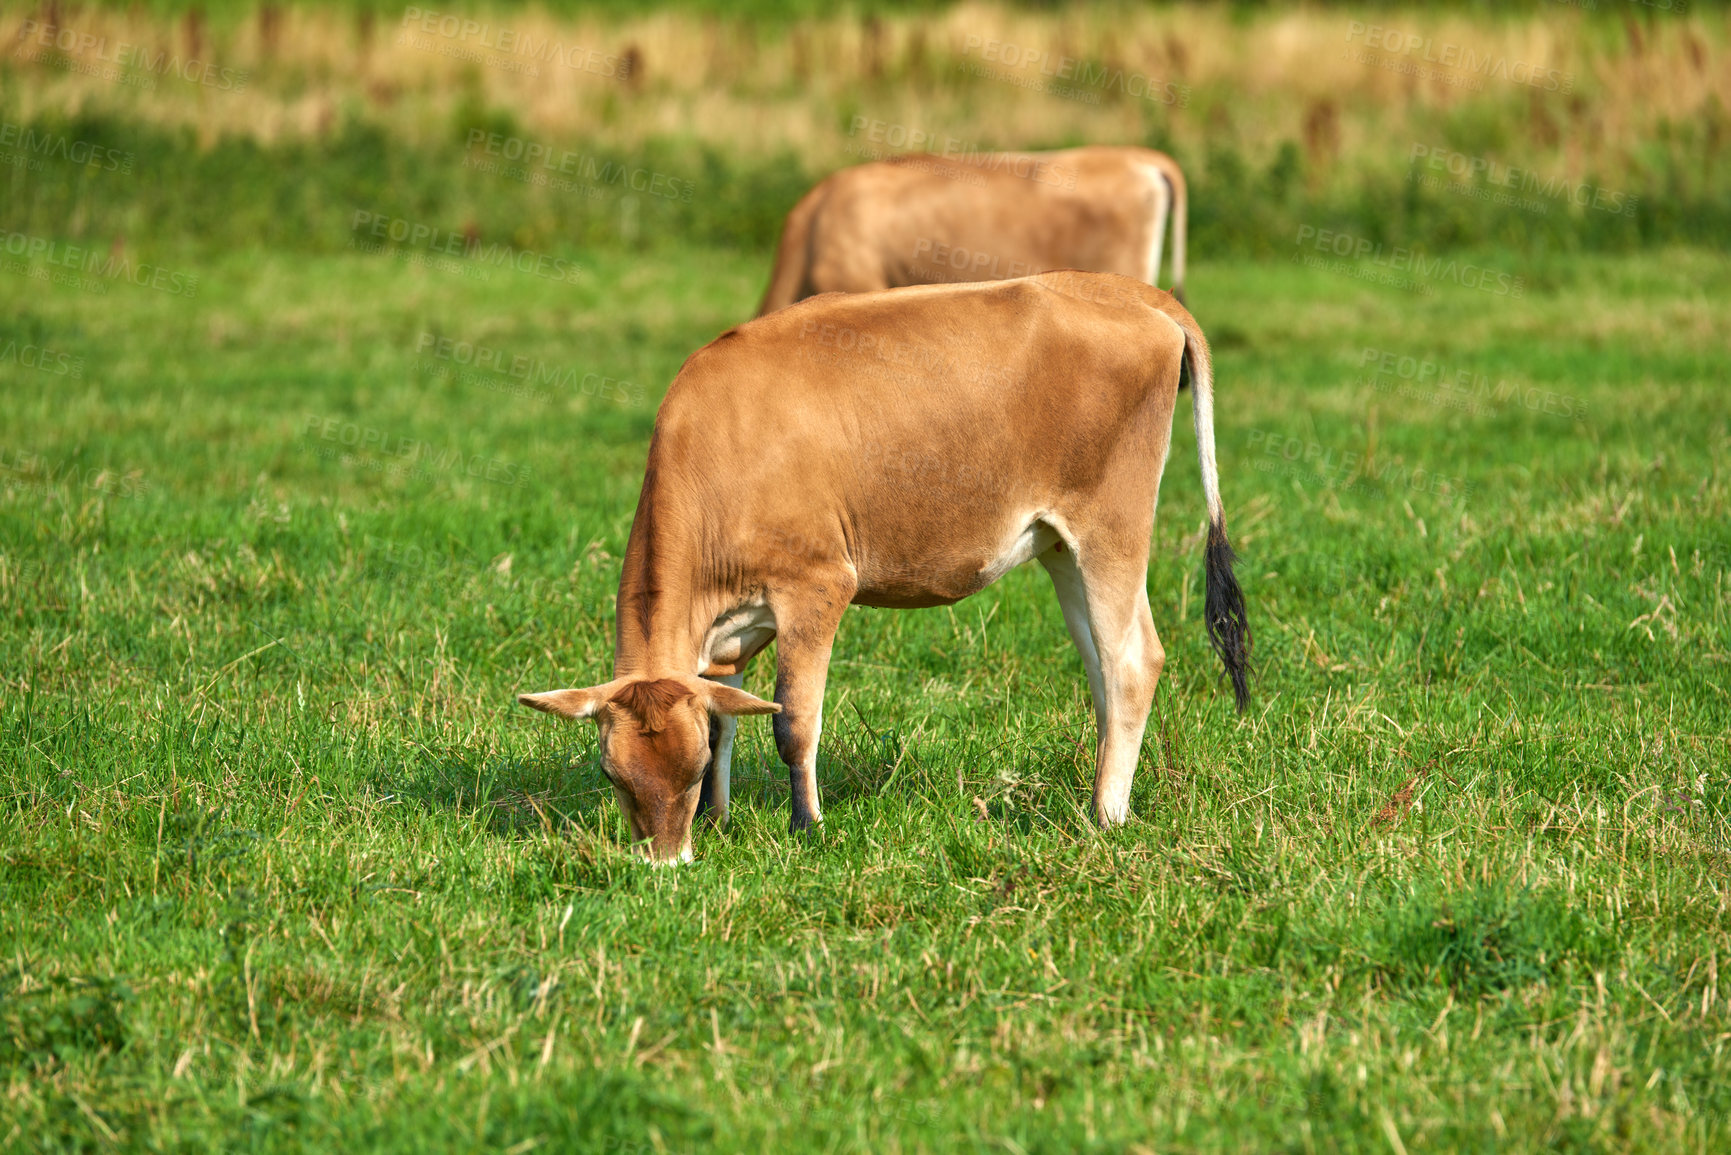 Buy stock photo Two brown cows grazing on an organic green dairy farm in the countryside. Cattle or livestock in an open, empty and vast grassy field or meadow. Bovine animals on agricultural and sustainable land